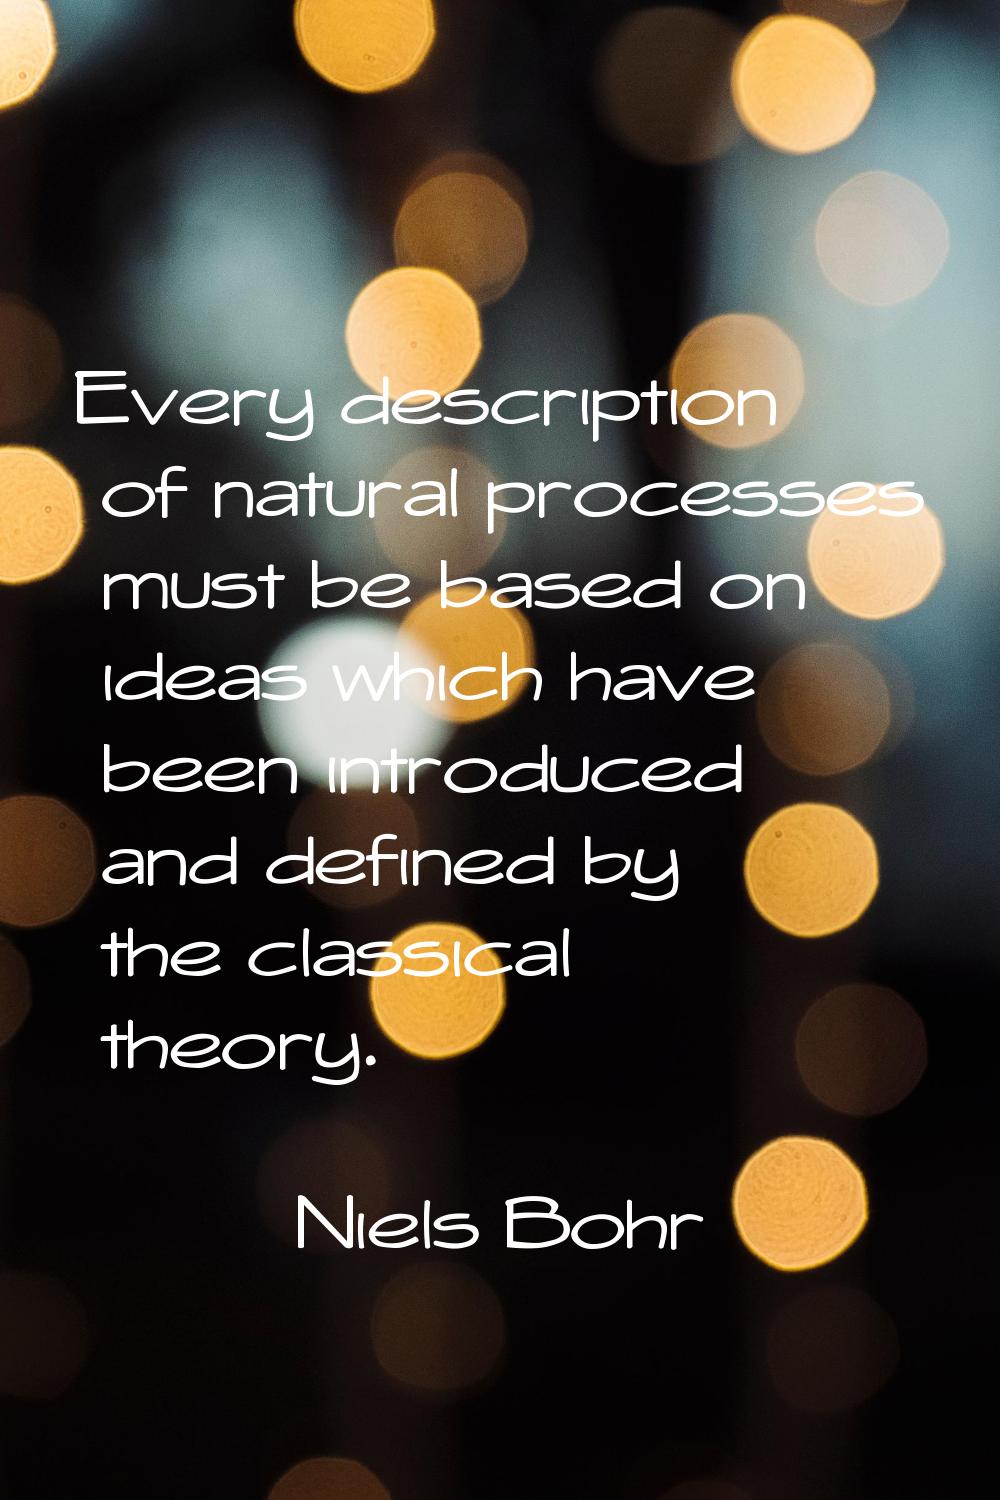 Every description of natural processes must be based on ideas which have been introduced and define